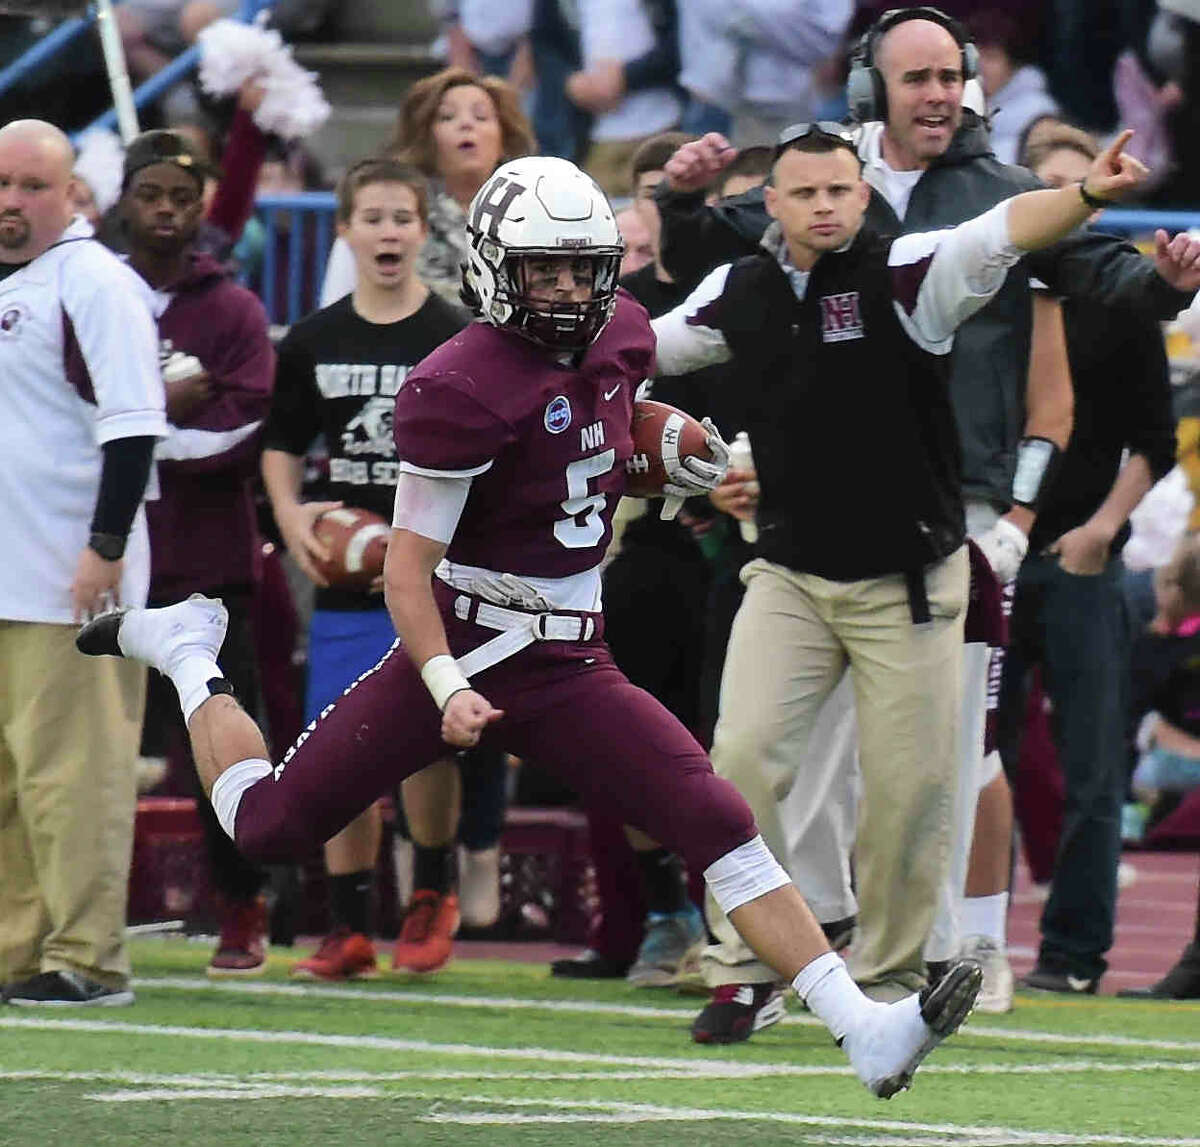 North Haven’s Mike Montano busts loose for a touchdown in the Class L championship loss to New Canaan. (Peter Hvizdak – New Haven Register)